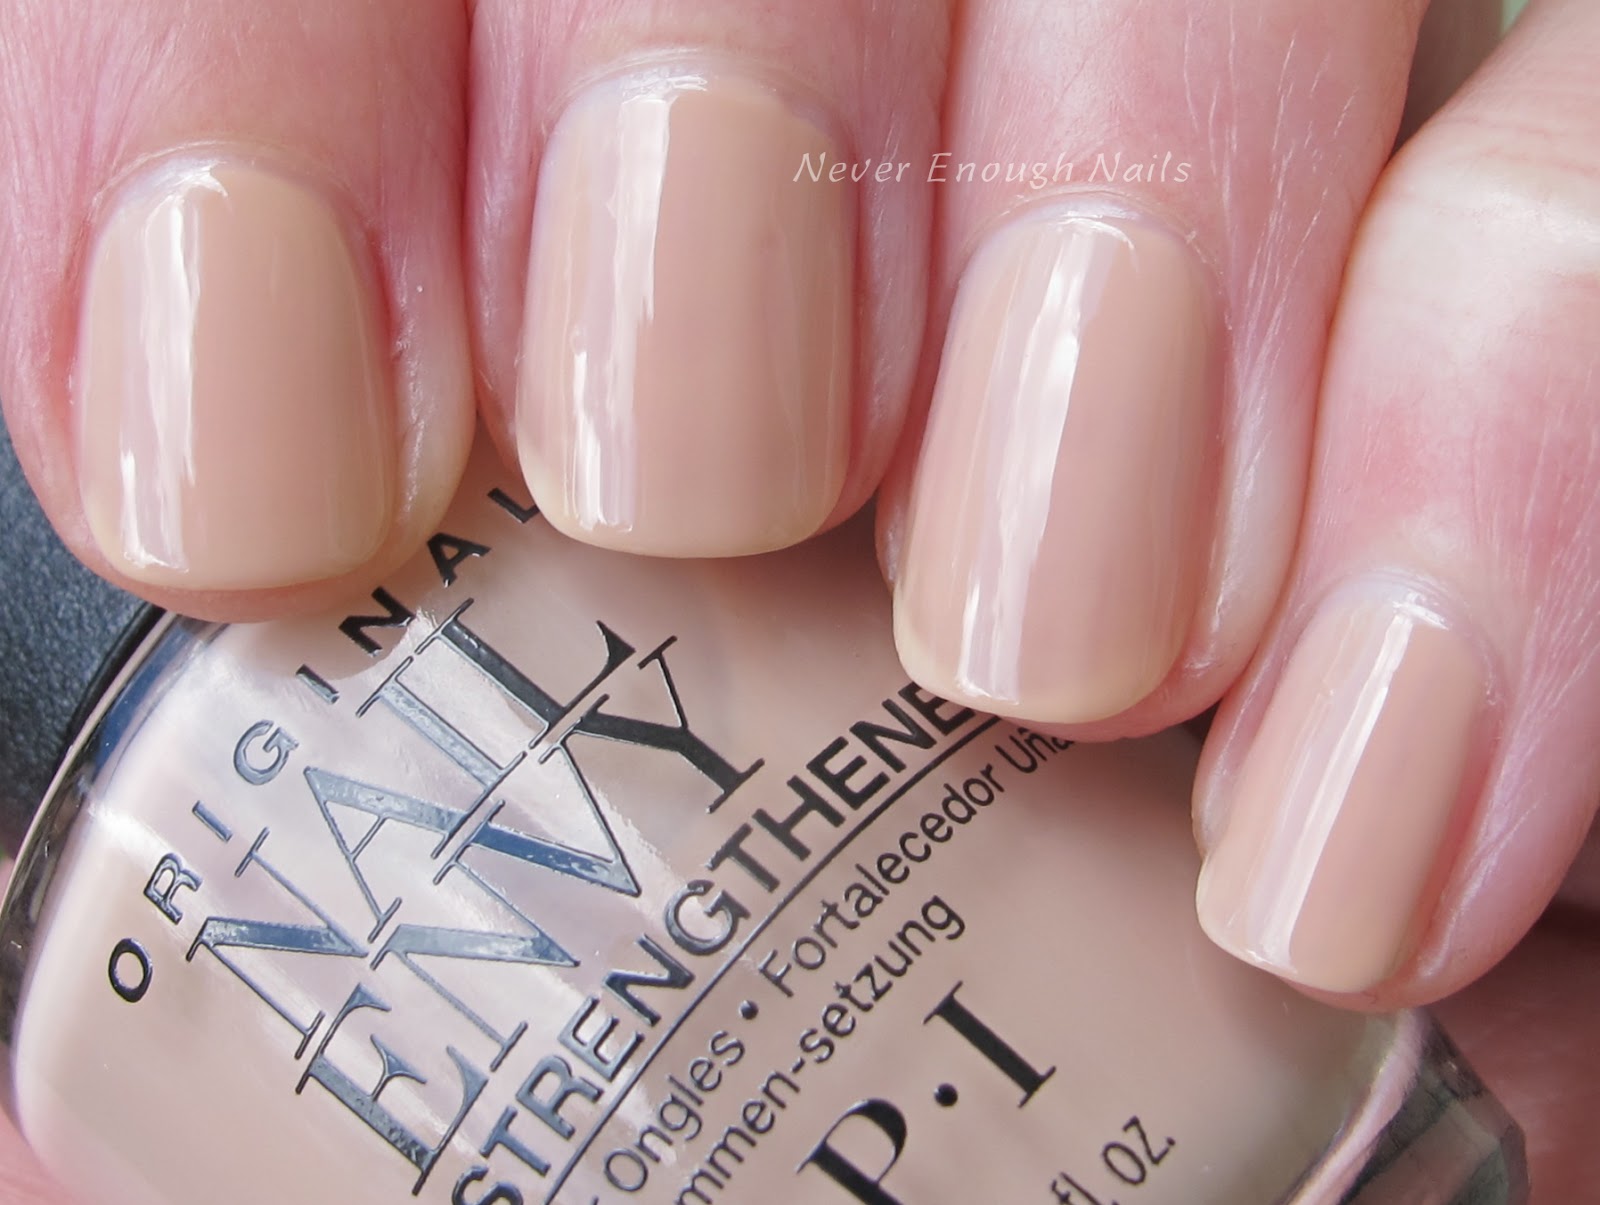 OPI Nail Care Products | Opi Nail Polish & Lacquer Online India - Sephora  NNNOW